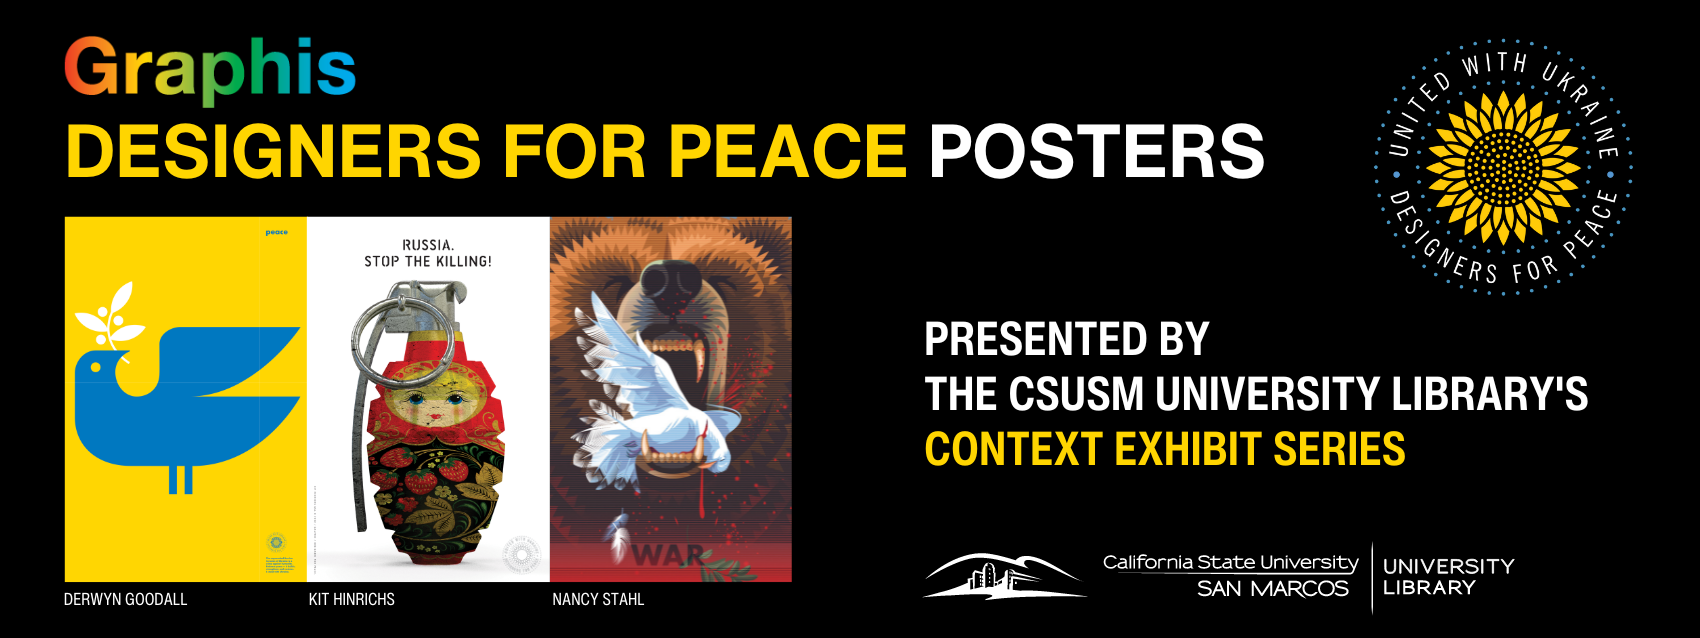 Image for the Spotlight on Fall Context Exhibit - Graphis Designers for Peace Posters